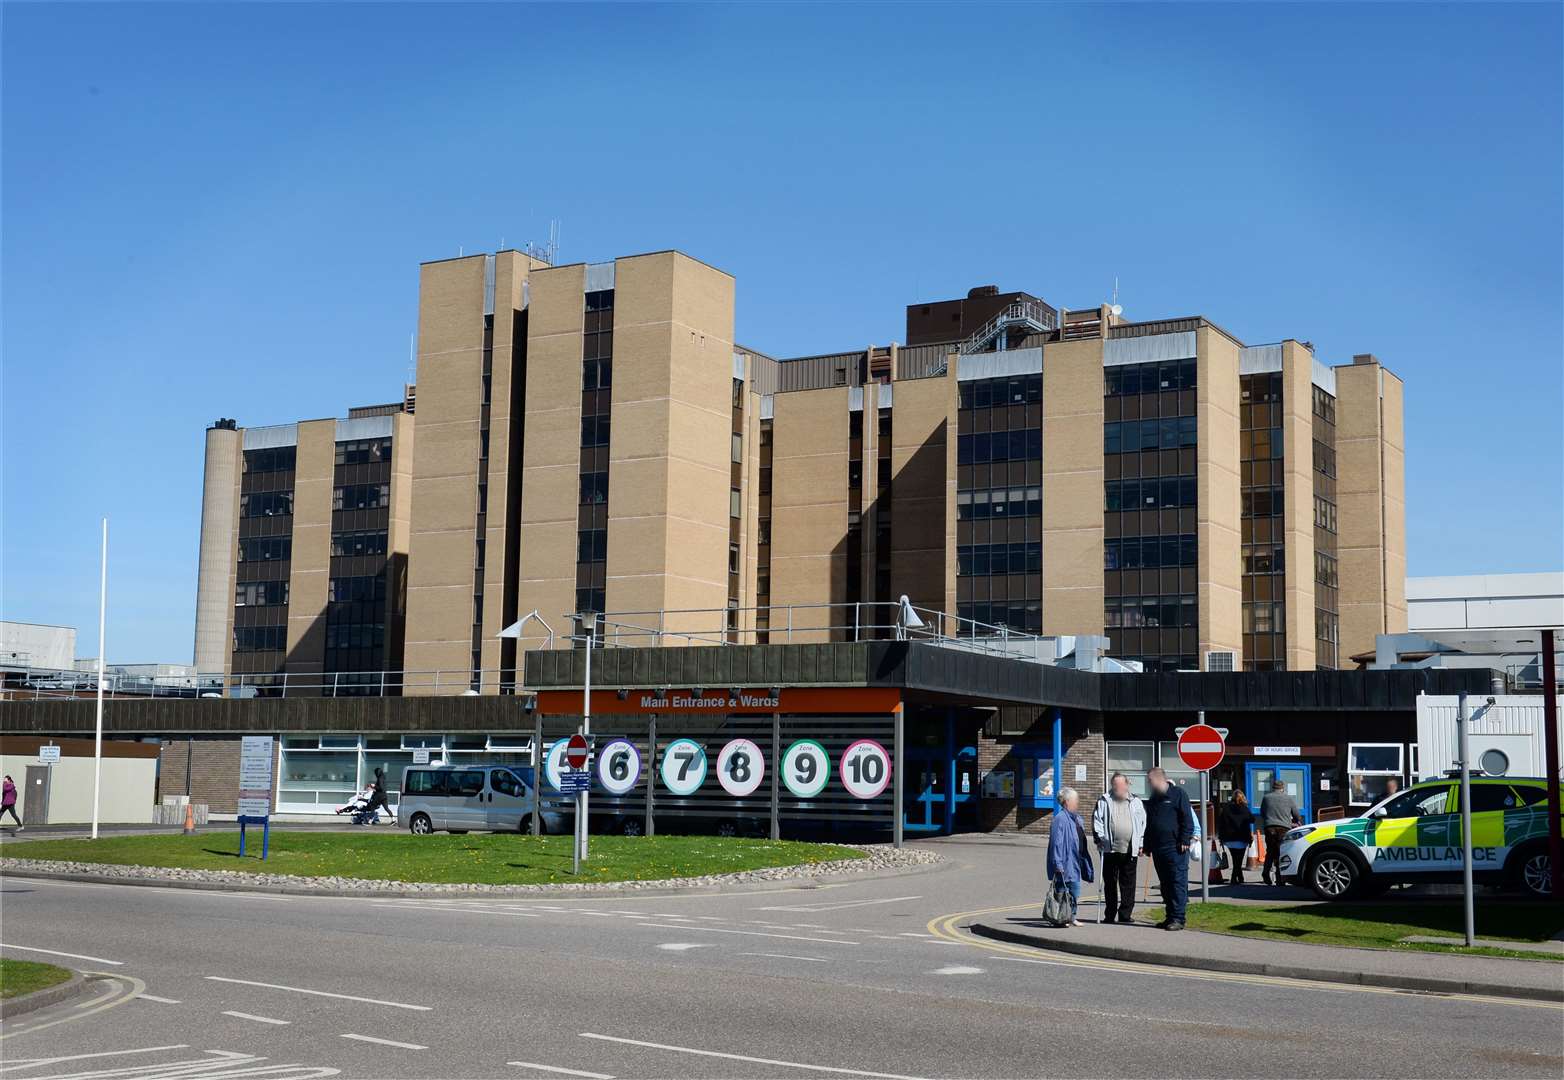 Endoscopy services will be boosted at Raigmore Hospital for a 30-week period.